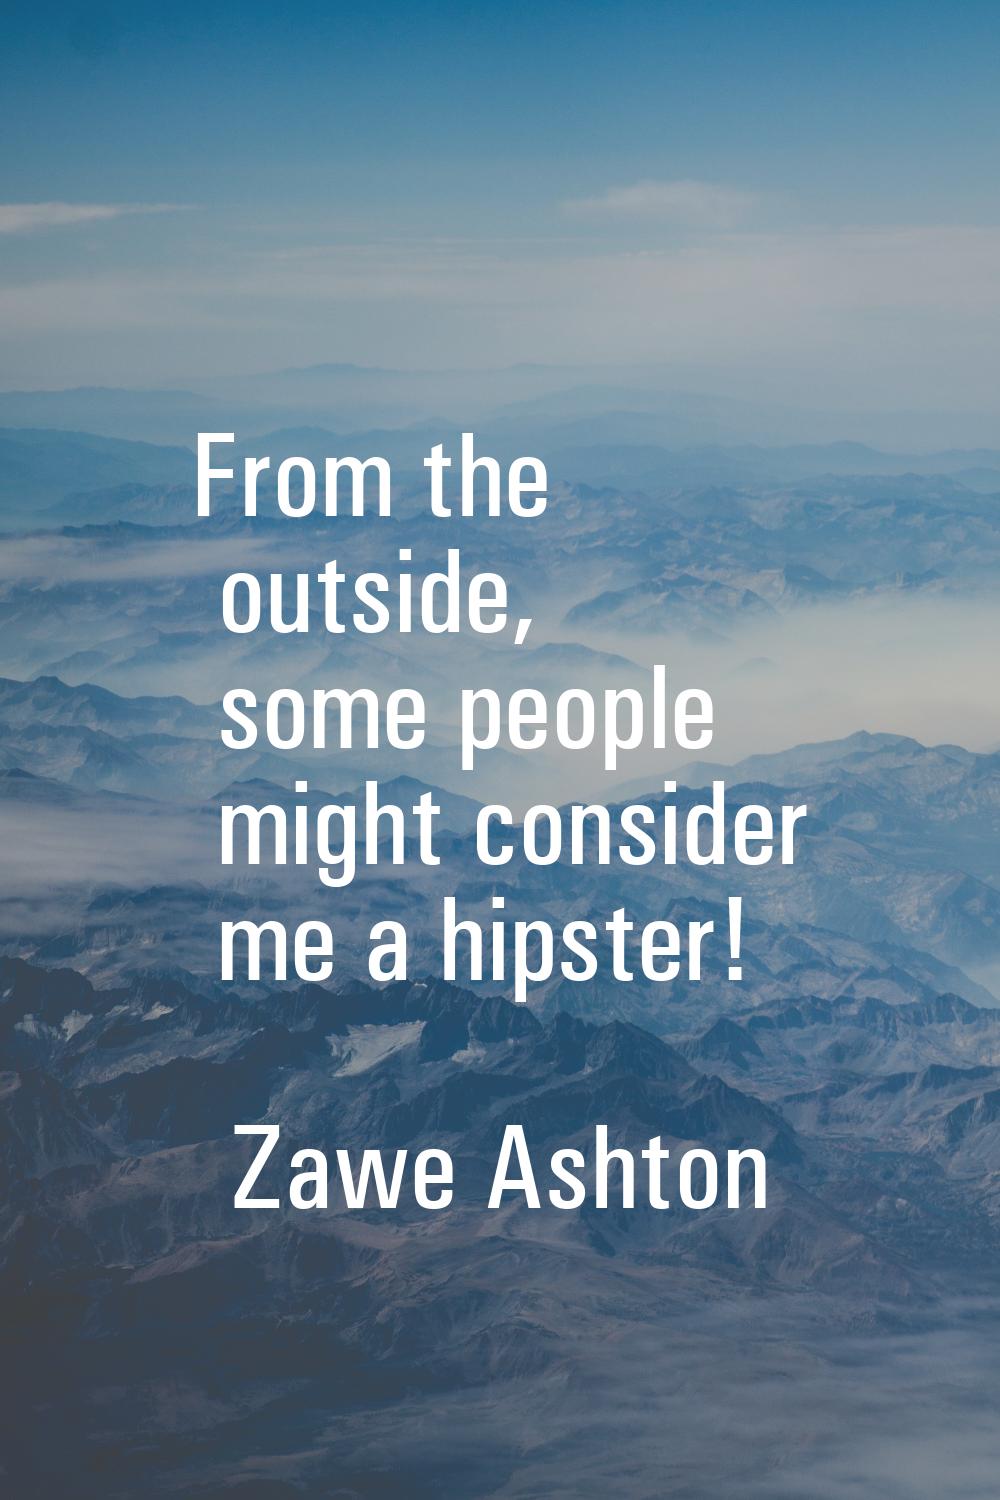 From the outside, some people might consider me a hipster!